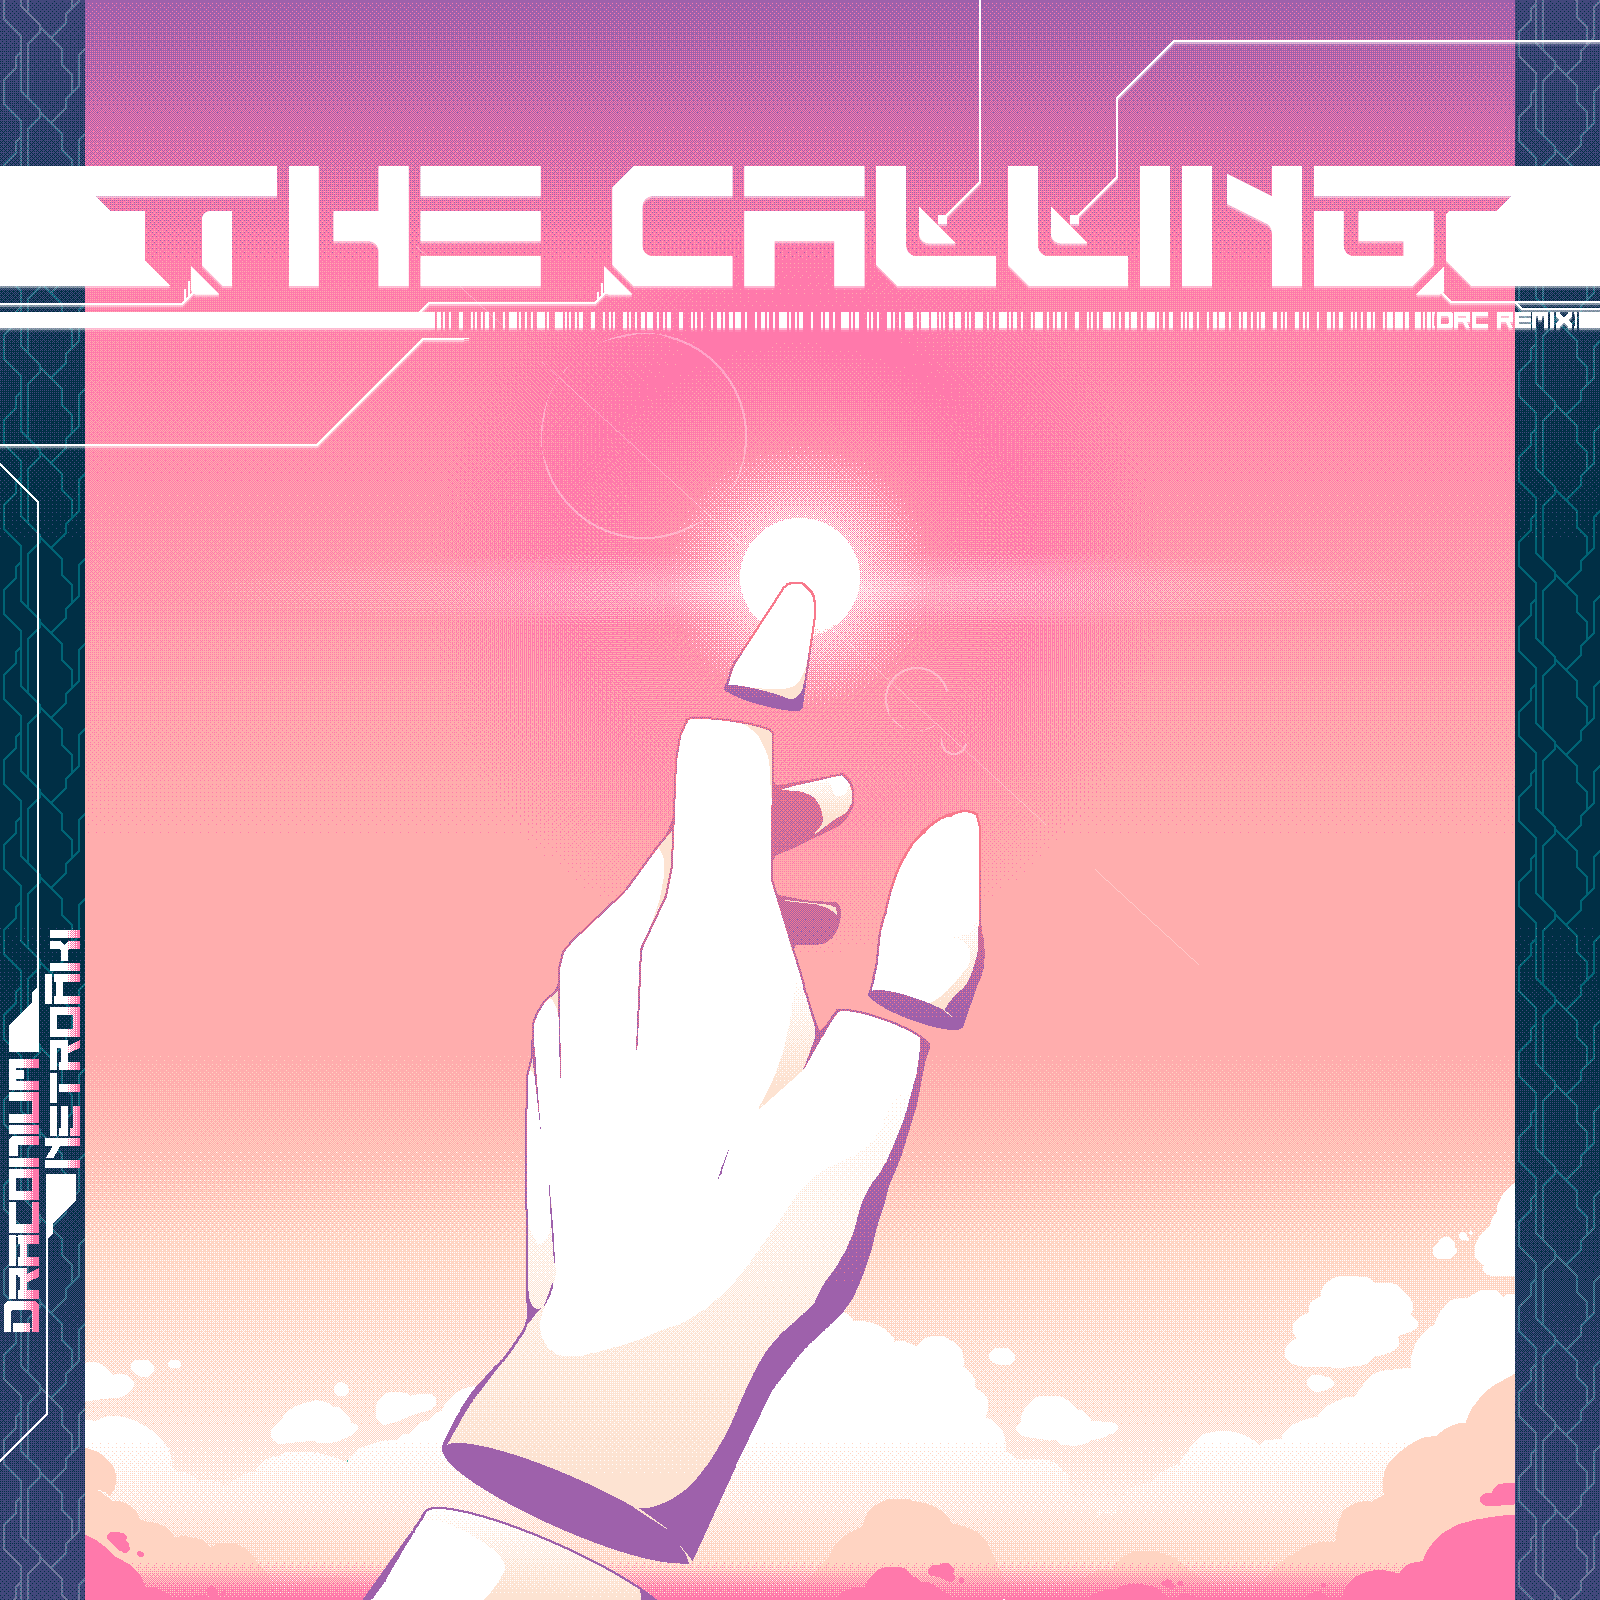 The cover art for The Calling. It has a hand pointing at a sun in a purple pink sky, with two blue borders on either side that have techy stuff. In the top third, theres THE CALLING in all caps, and vertically on the left there's DRACONIUM and NetroAki. very cool art 10/10